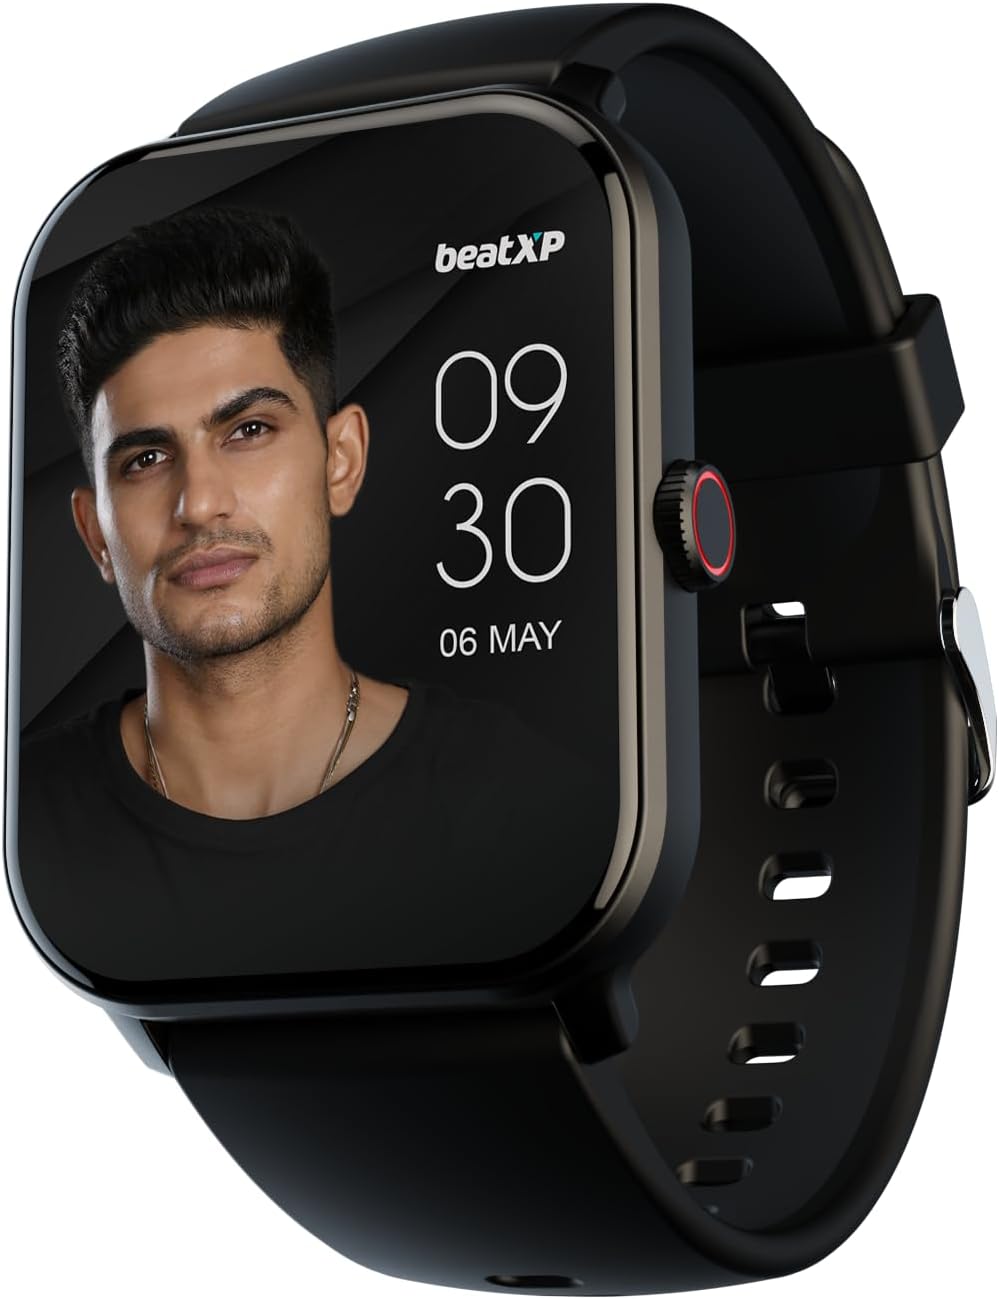 beatXP Marv Neo 1.85” (4.6 cm) Display, Bluetooth Calling Smart Watch, Smart AI Voice Assistant, 100+ Sports Modes, Heart & SpO2 Monitoring, IP68, Fast Charging (Electric Black)